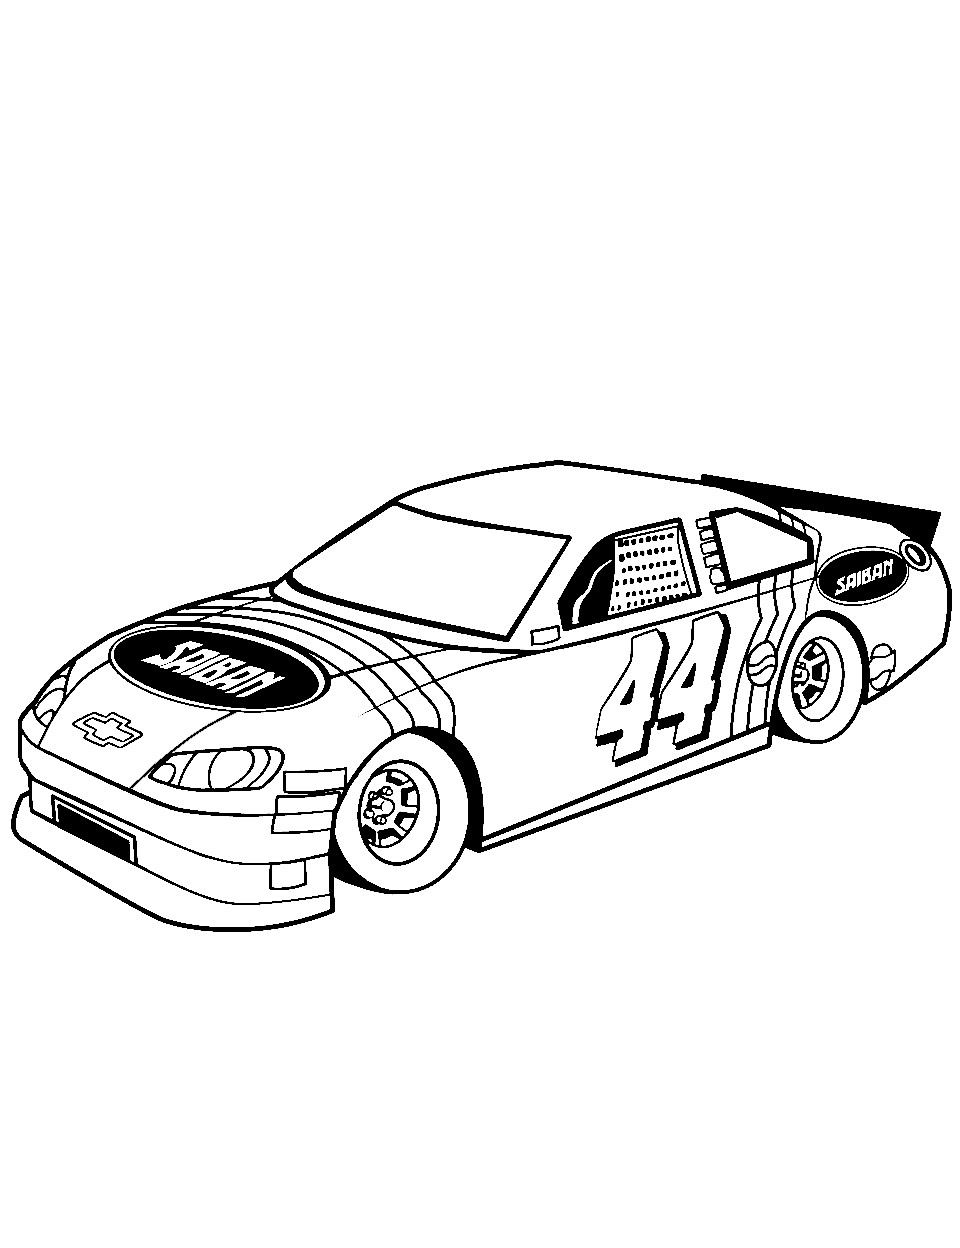 Nascar Prototype Race Car Coloring Page - A Nascar prototype race car showcased for inspection.